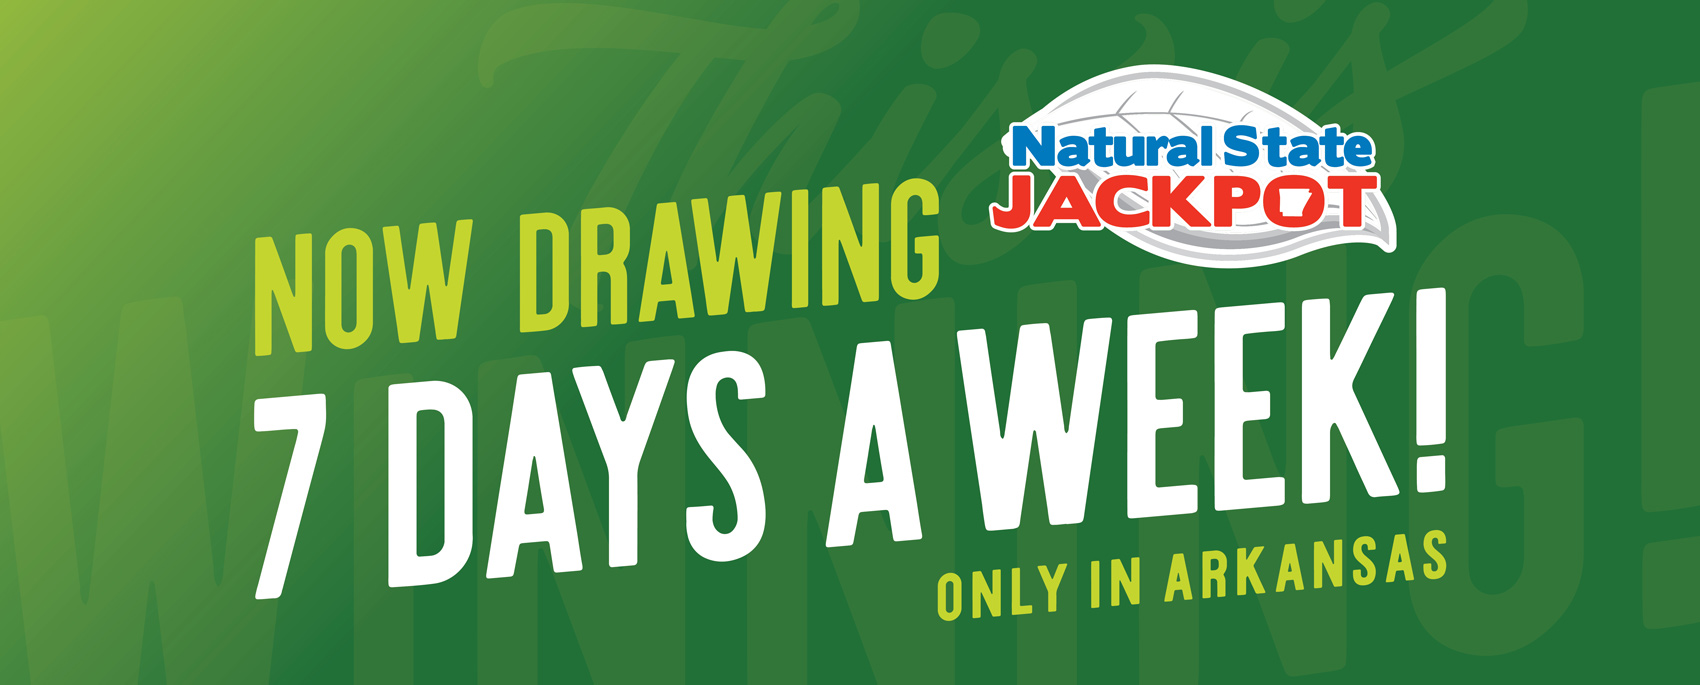 The jackpot starts at $50,000 and increases by $5,000 every draw until it reaches $100,000.